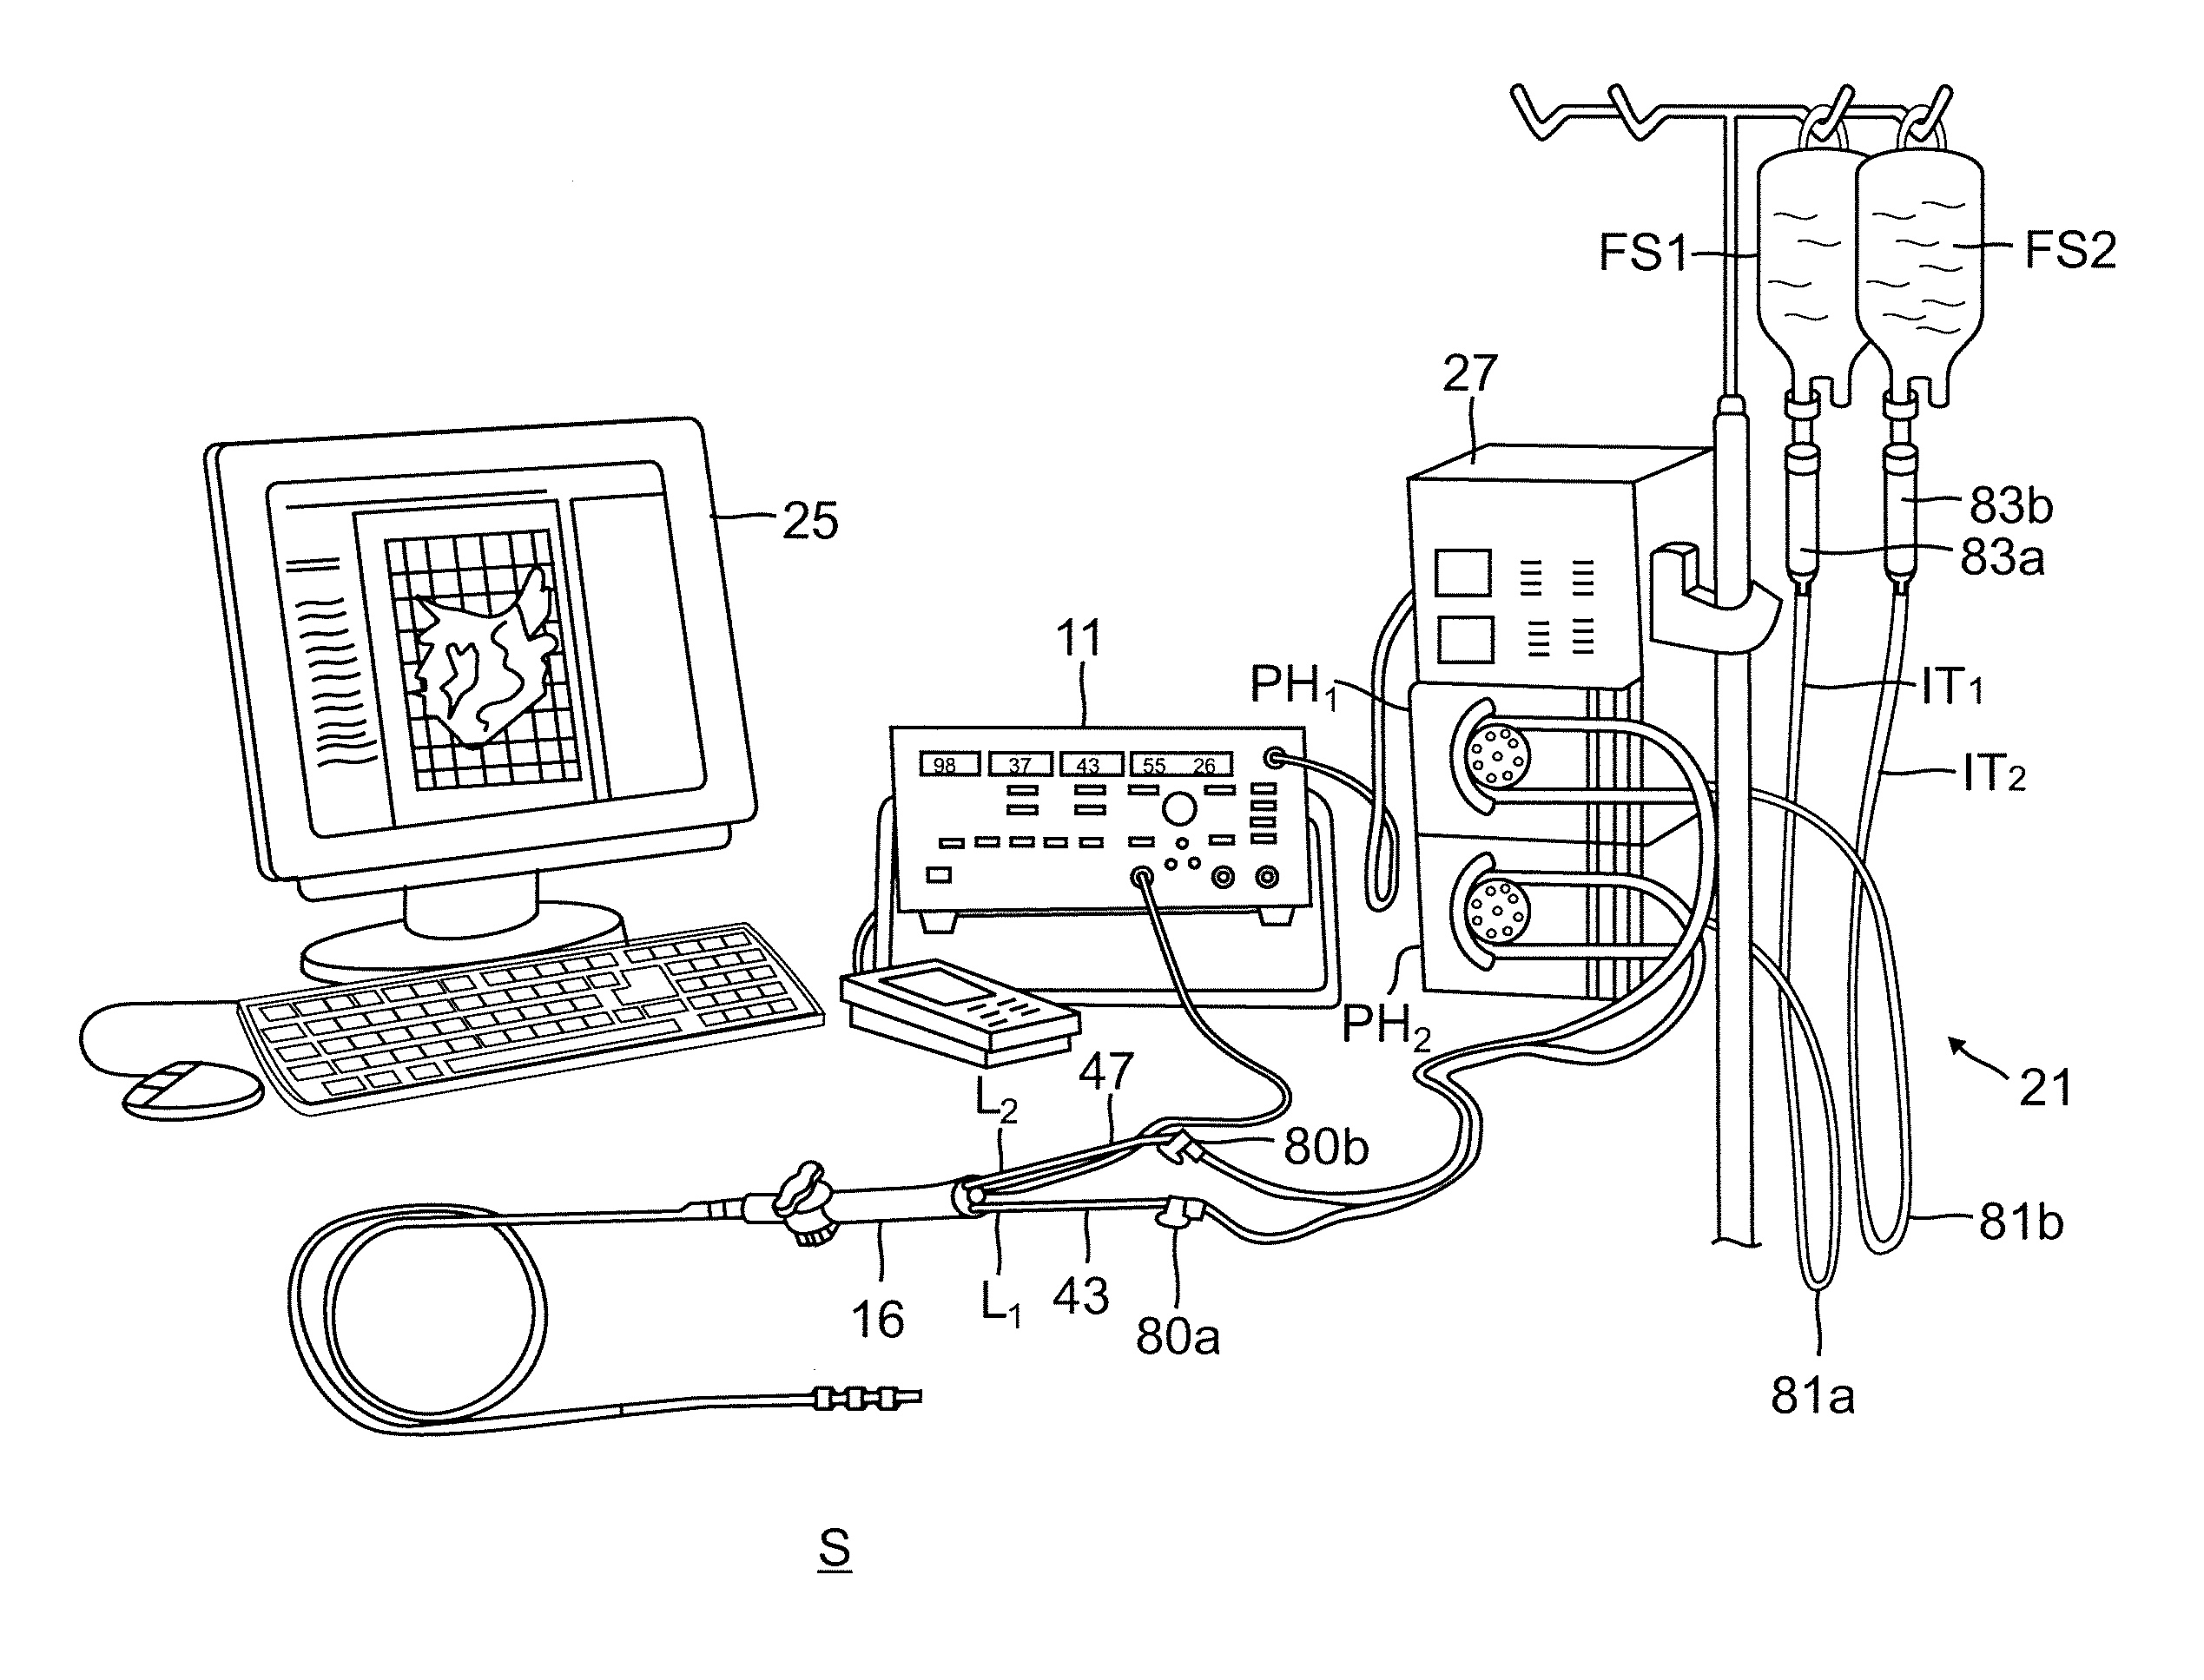 Integrated ablation system using catheter with multiple irrigation lumens